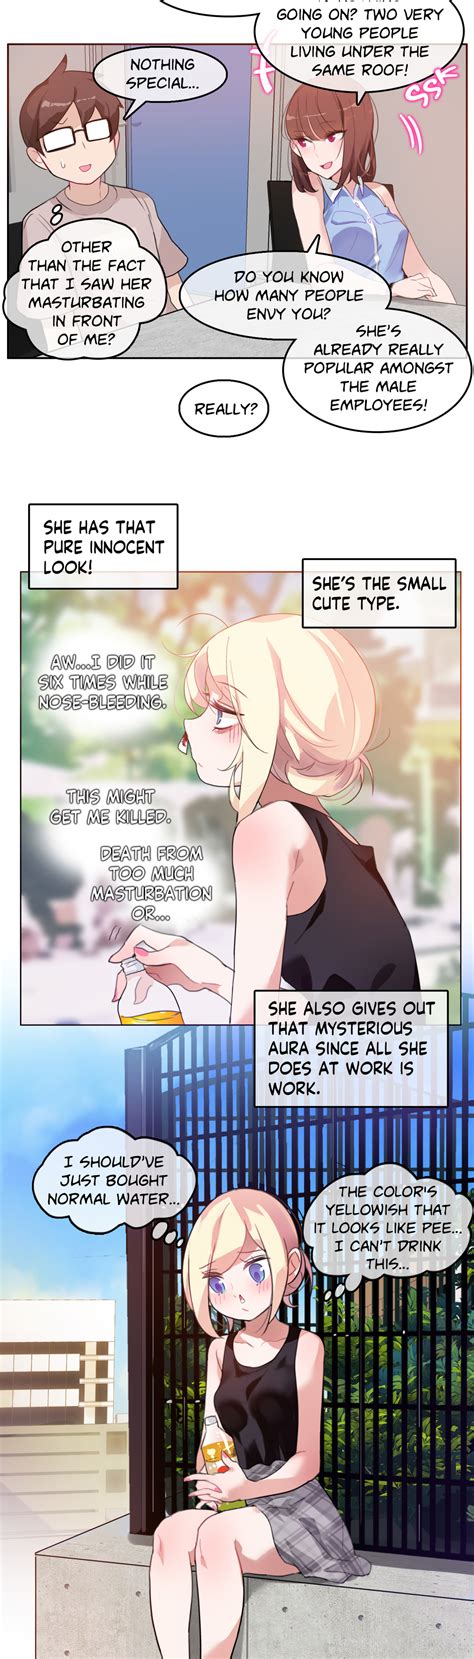 Read A Perverts Daily Life Online [Free Chapters] - Webtoonscan.com